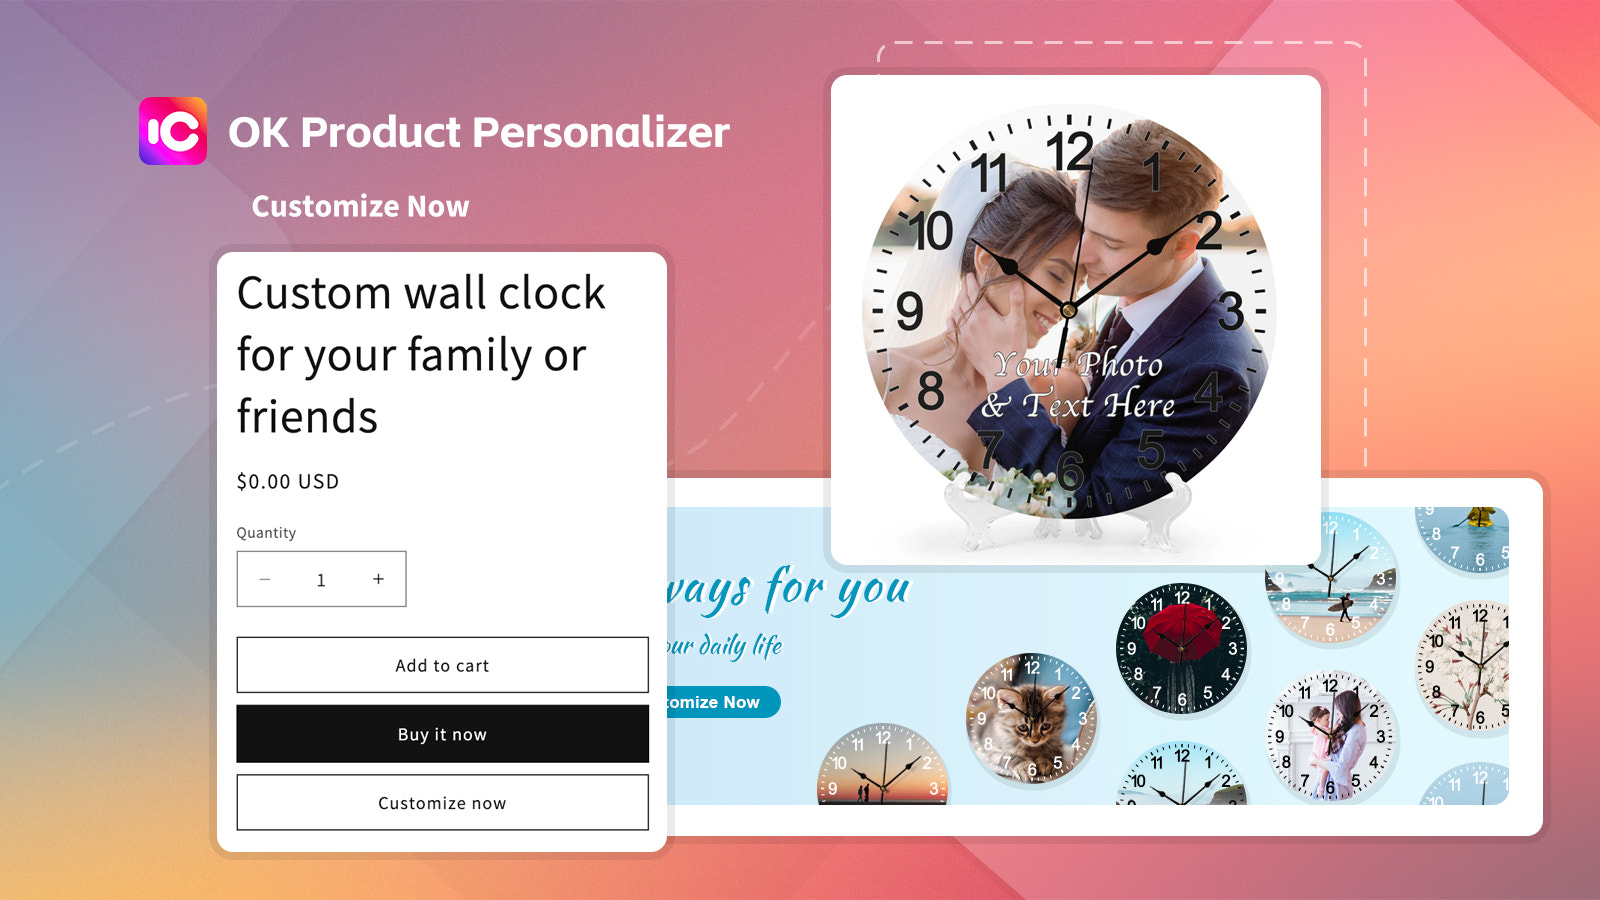 OK Product Personalizer Customize now